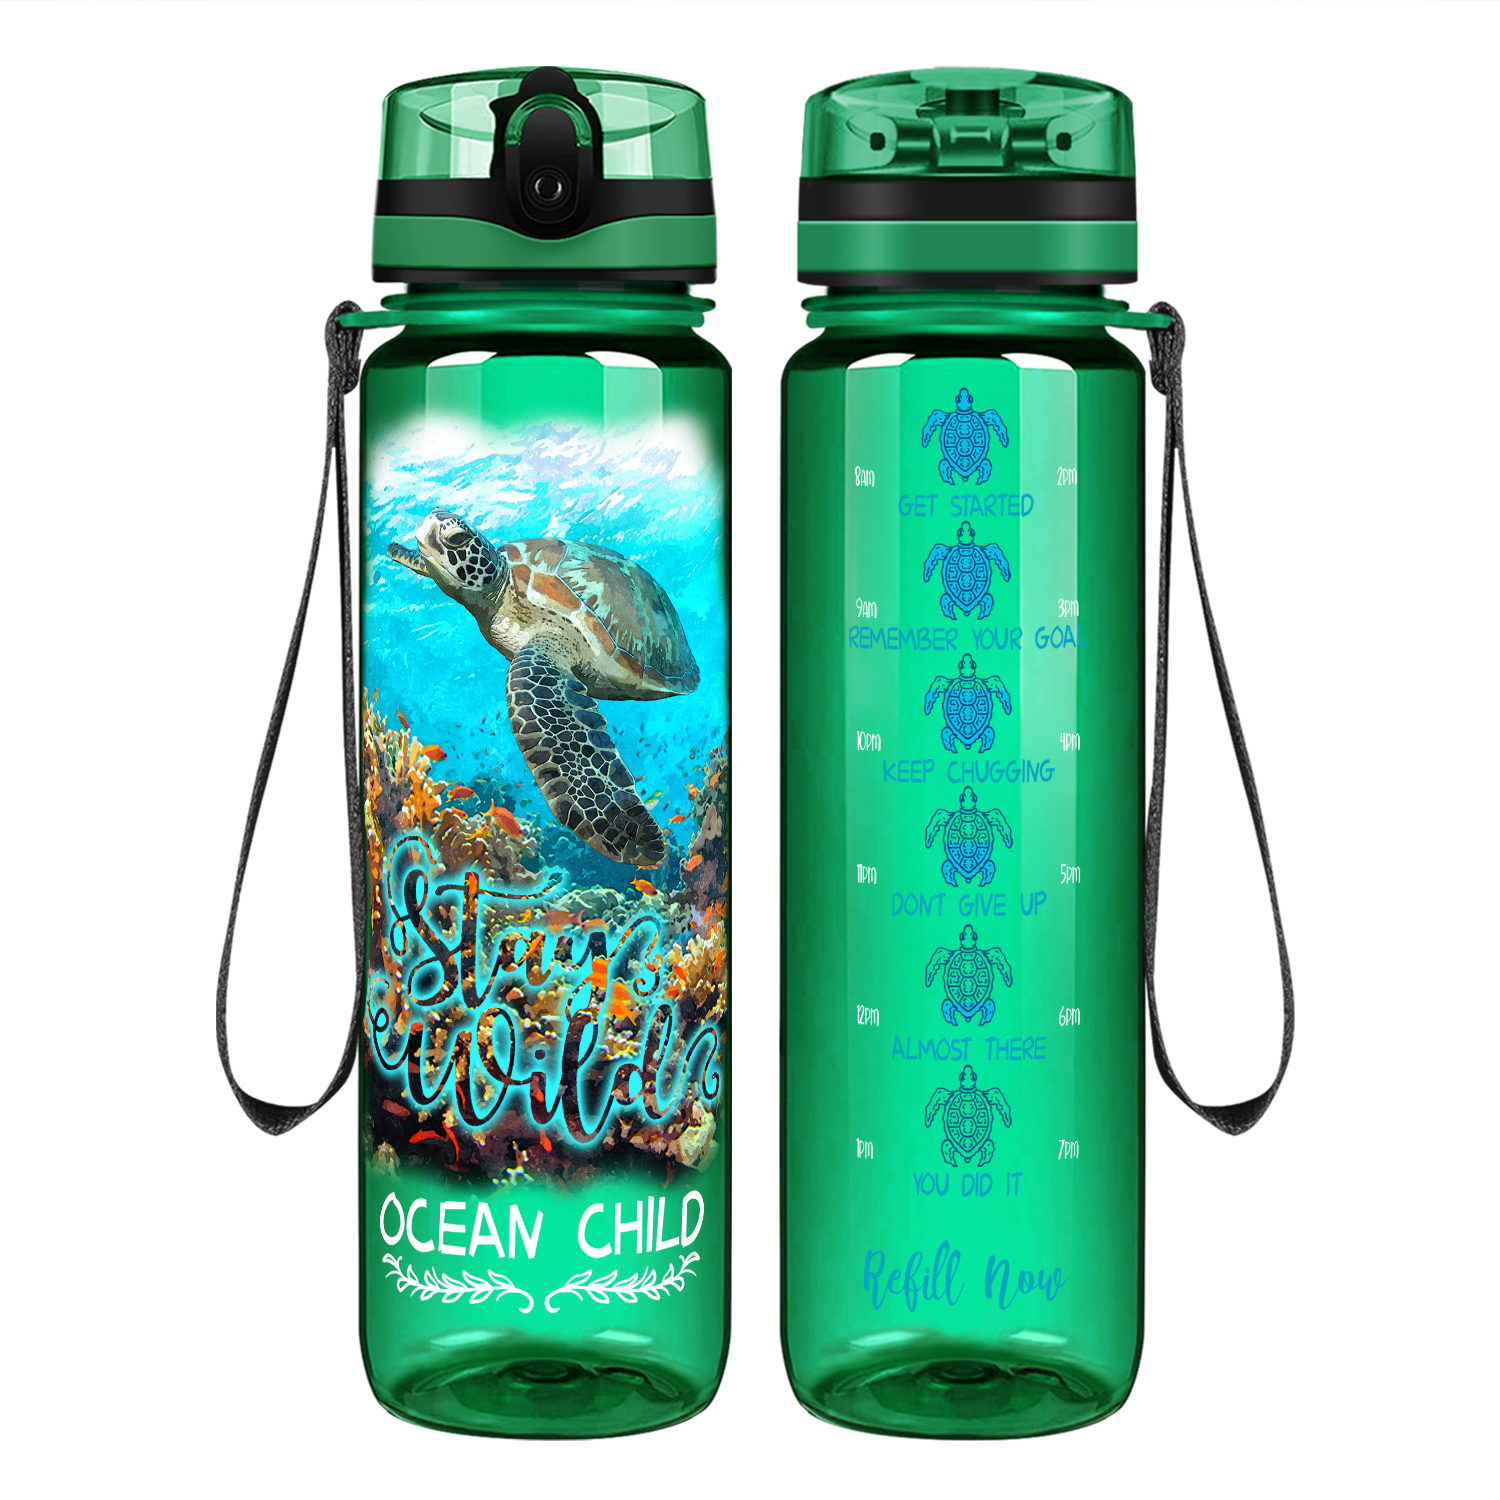 Stay Wild Ocean Child on 32 oz Motivational Tracking Water Bottle